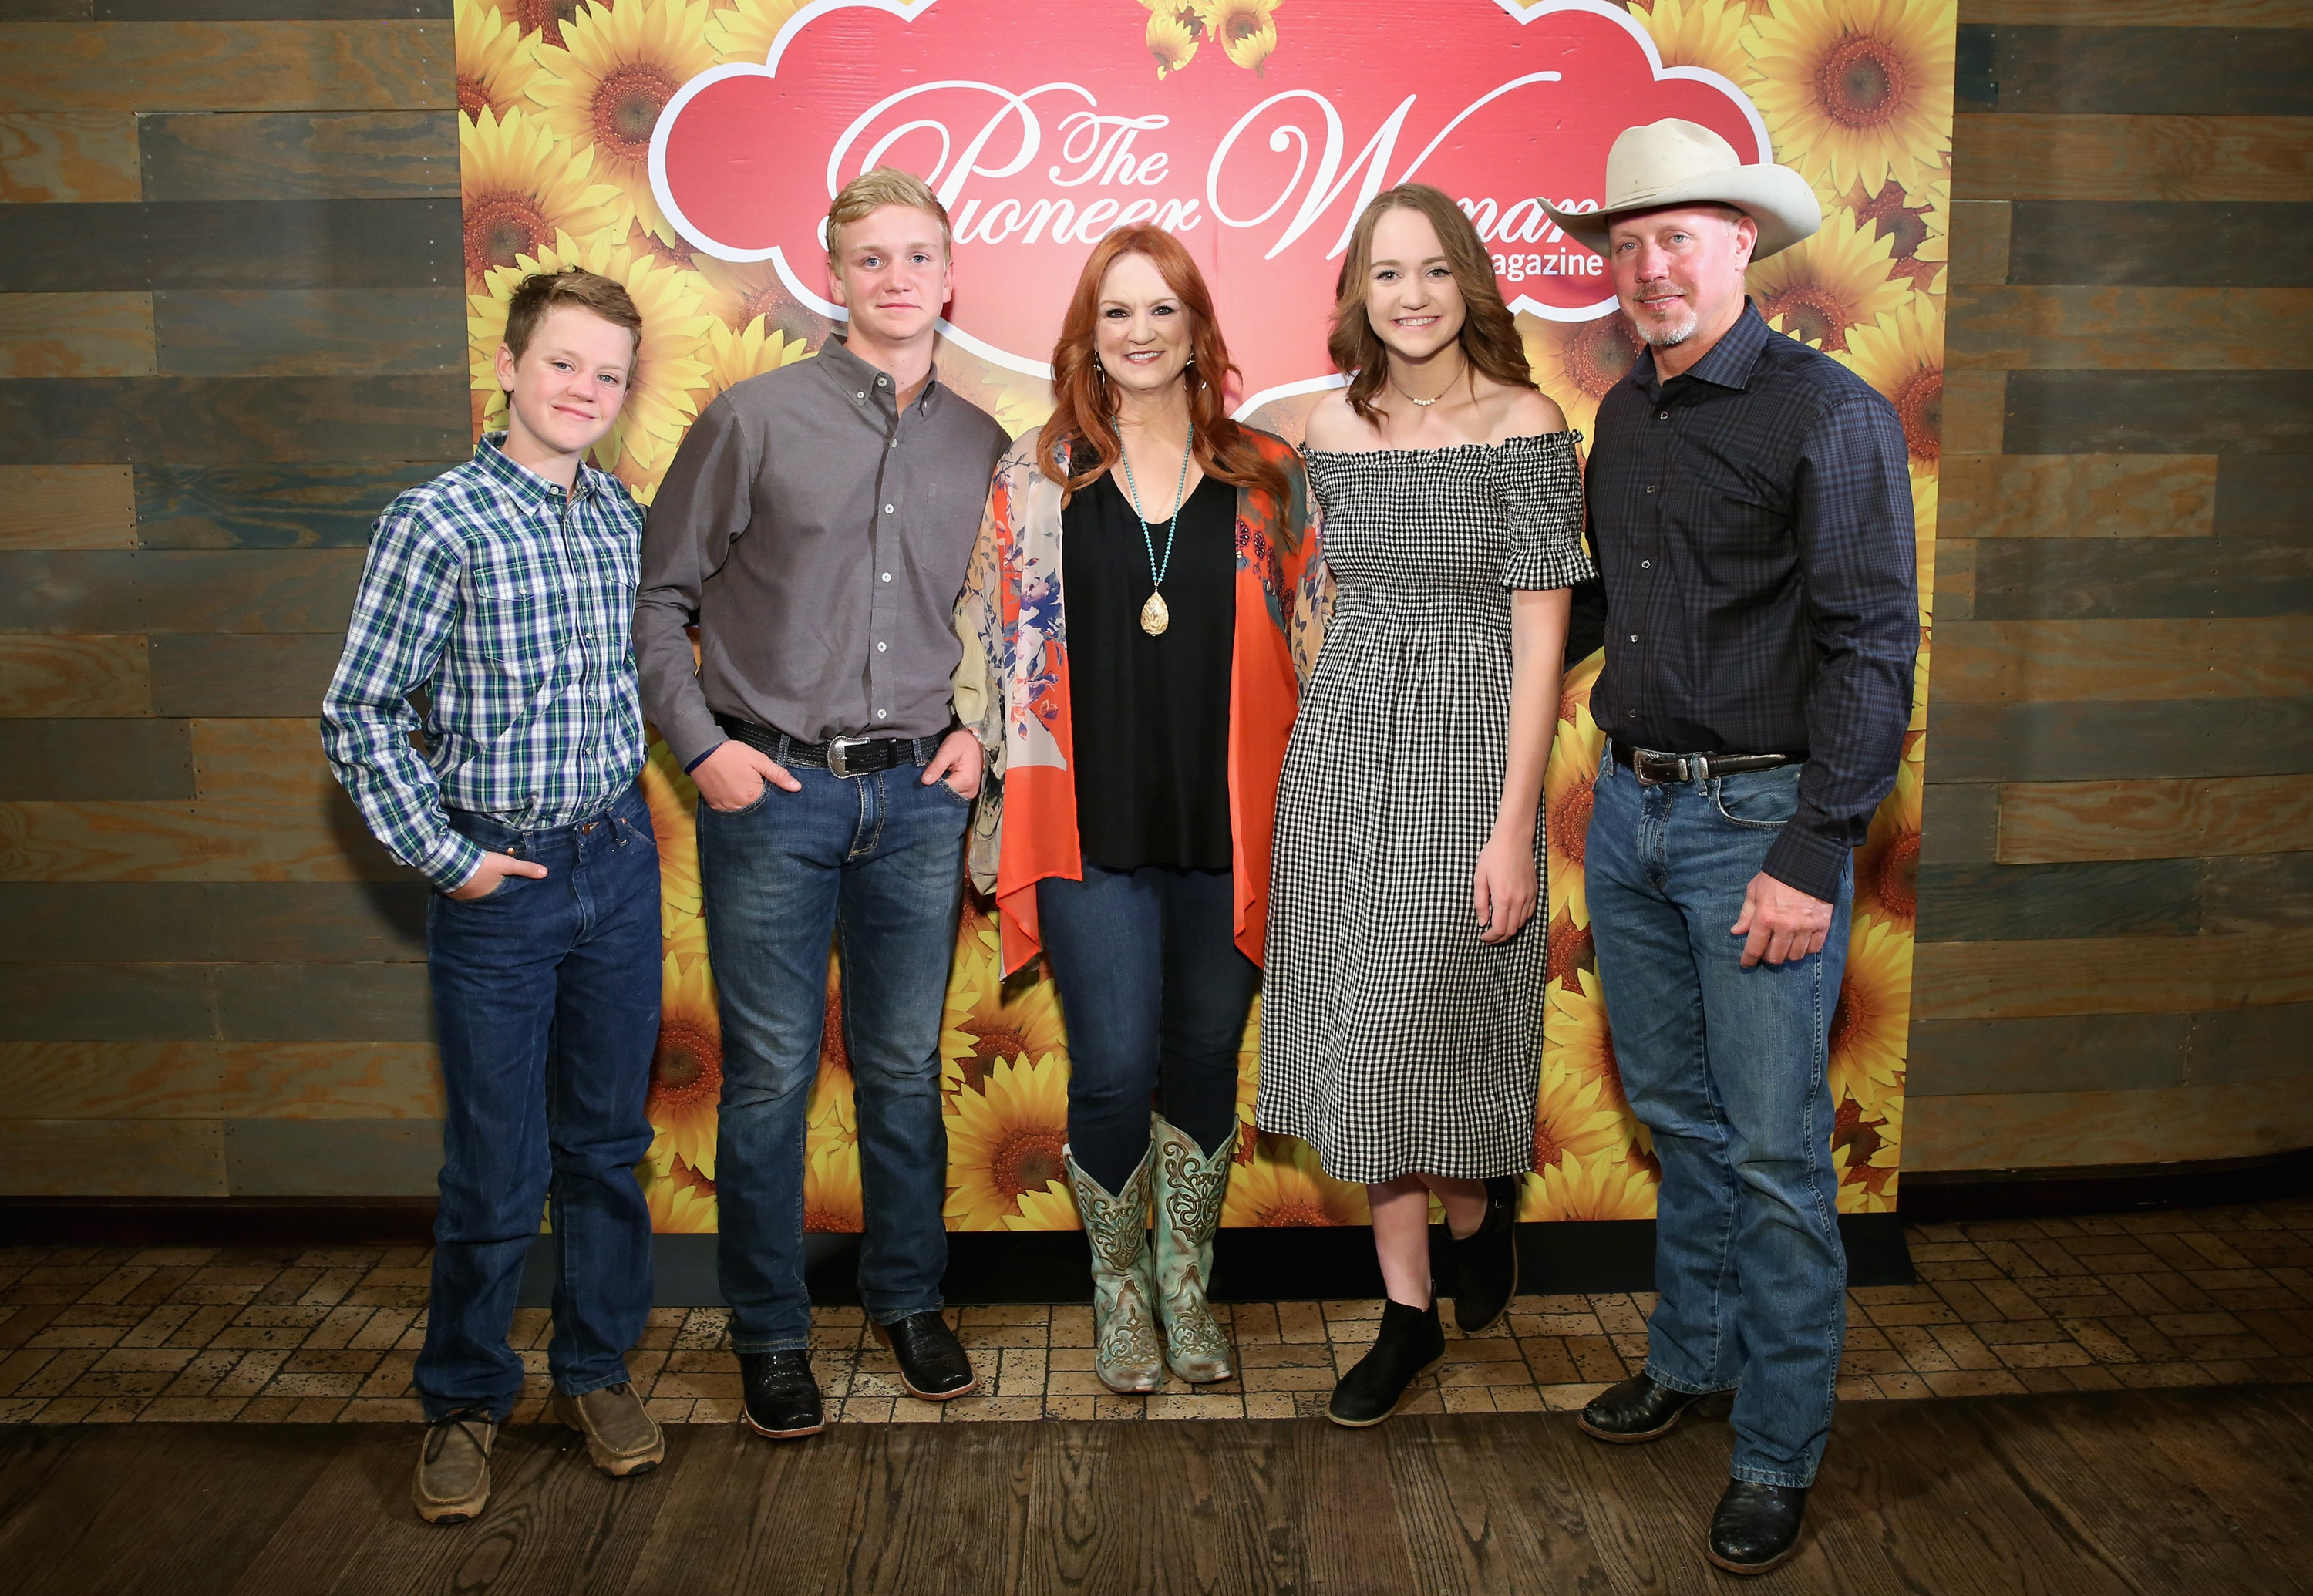 The Pioneer Woman Ree Drummond poses with her family at an event.